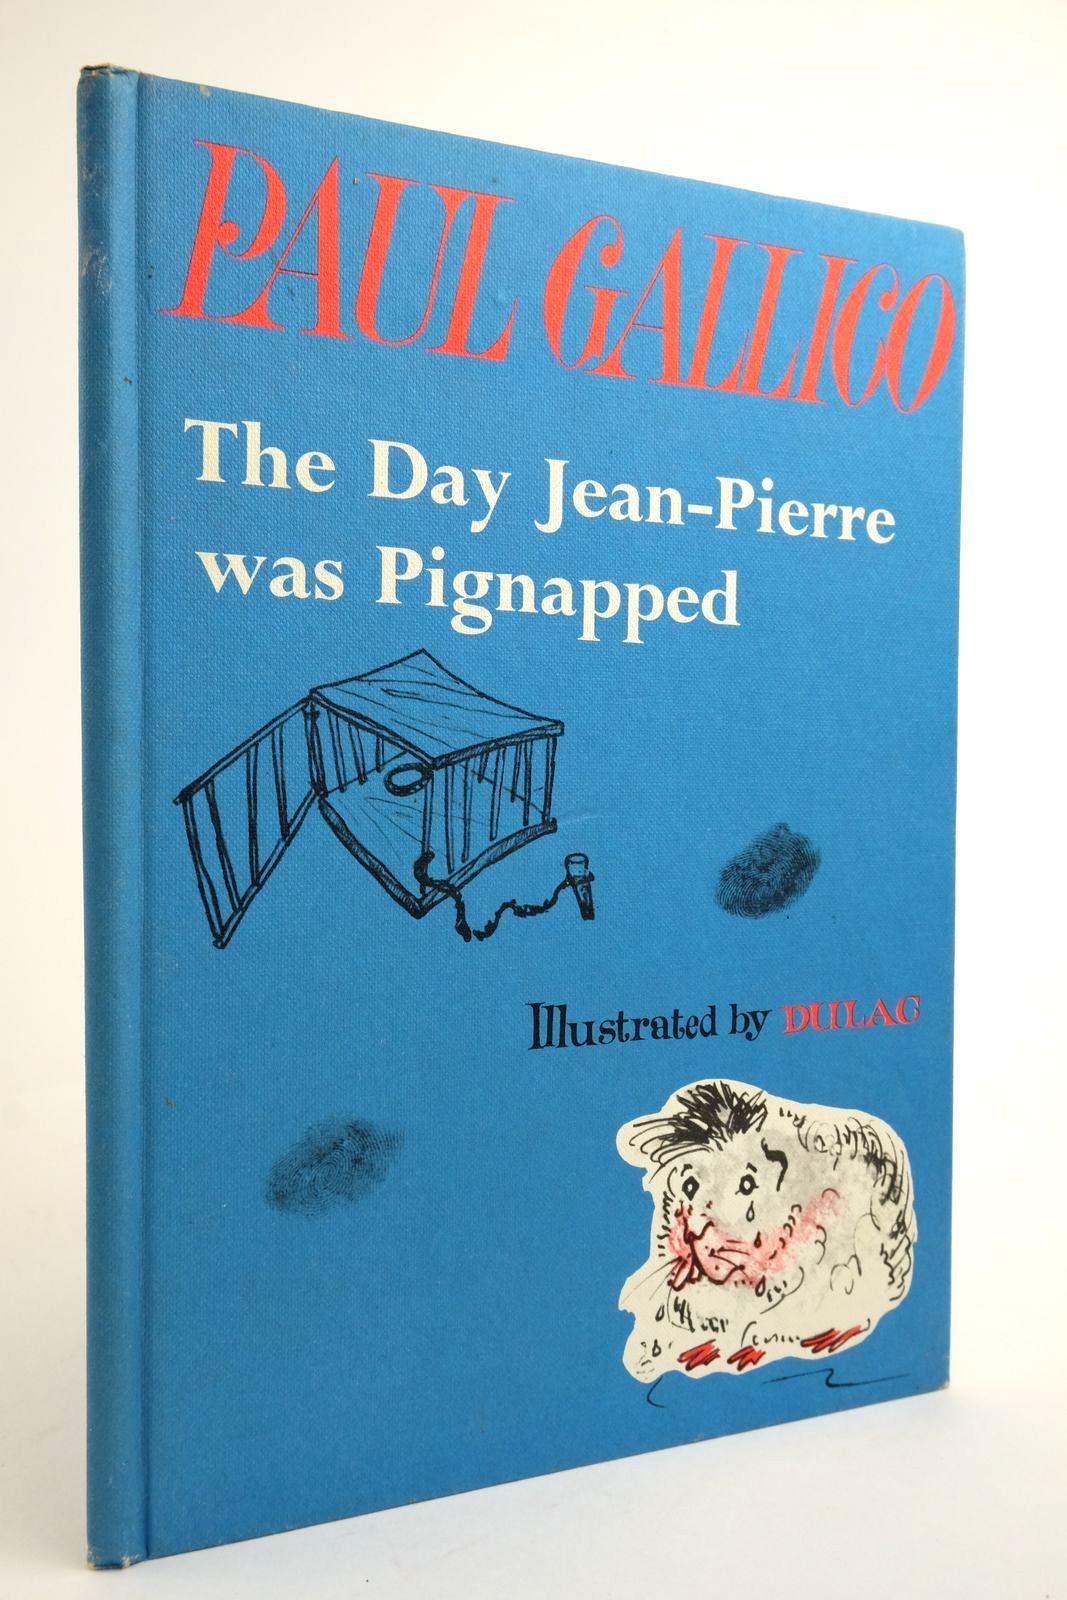 Photo of THE DAY JEAN-PIERRE WAS PIGNAPPED written by Gallico, Paul illustrated by Dulac,  published by Heinemann (STOCK CODE: 2135581)  for sale by Stella & Rose's Books